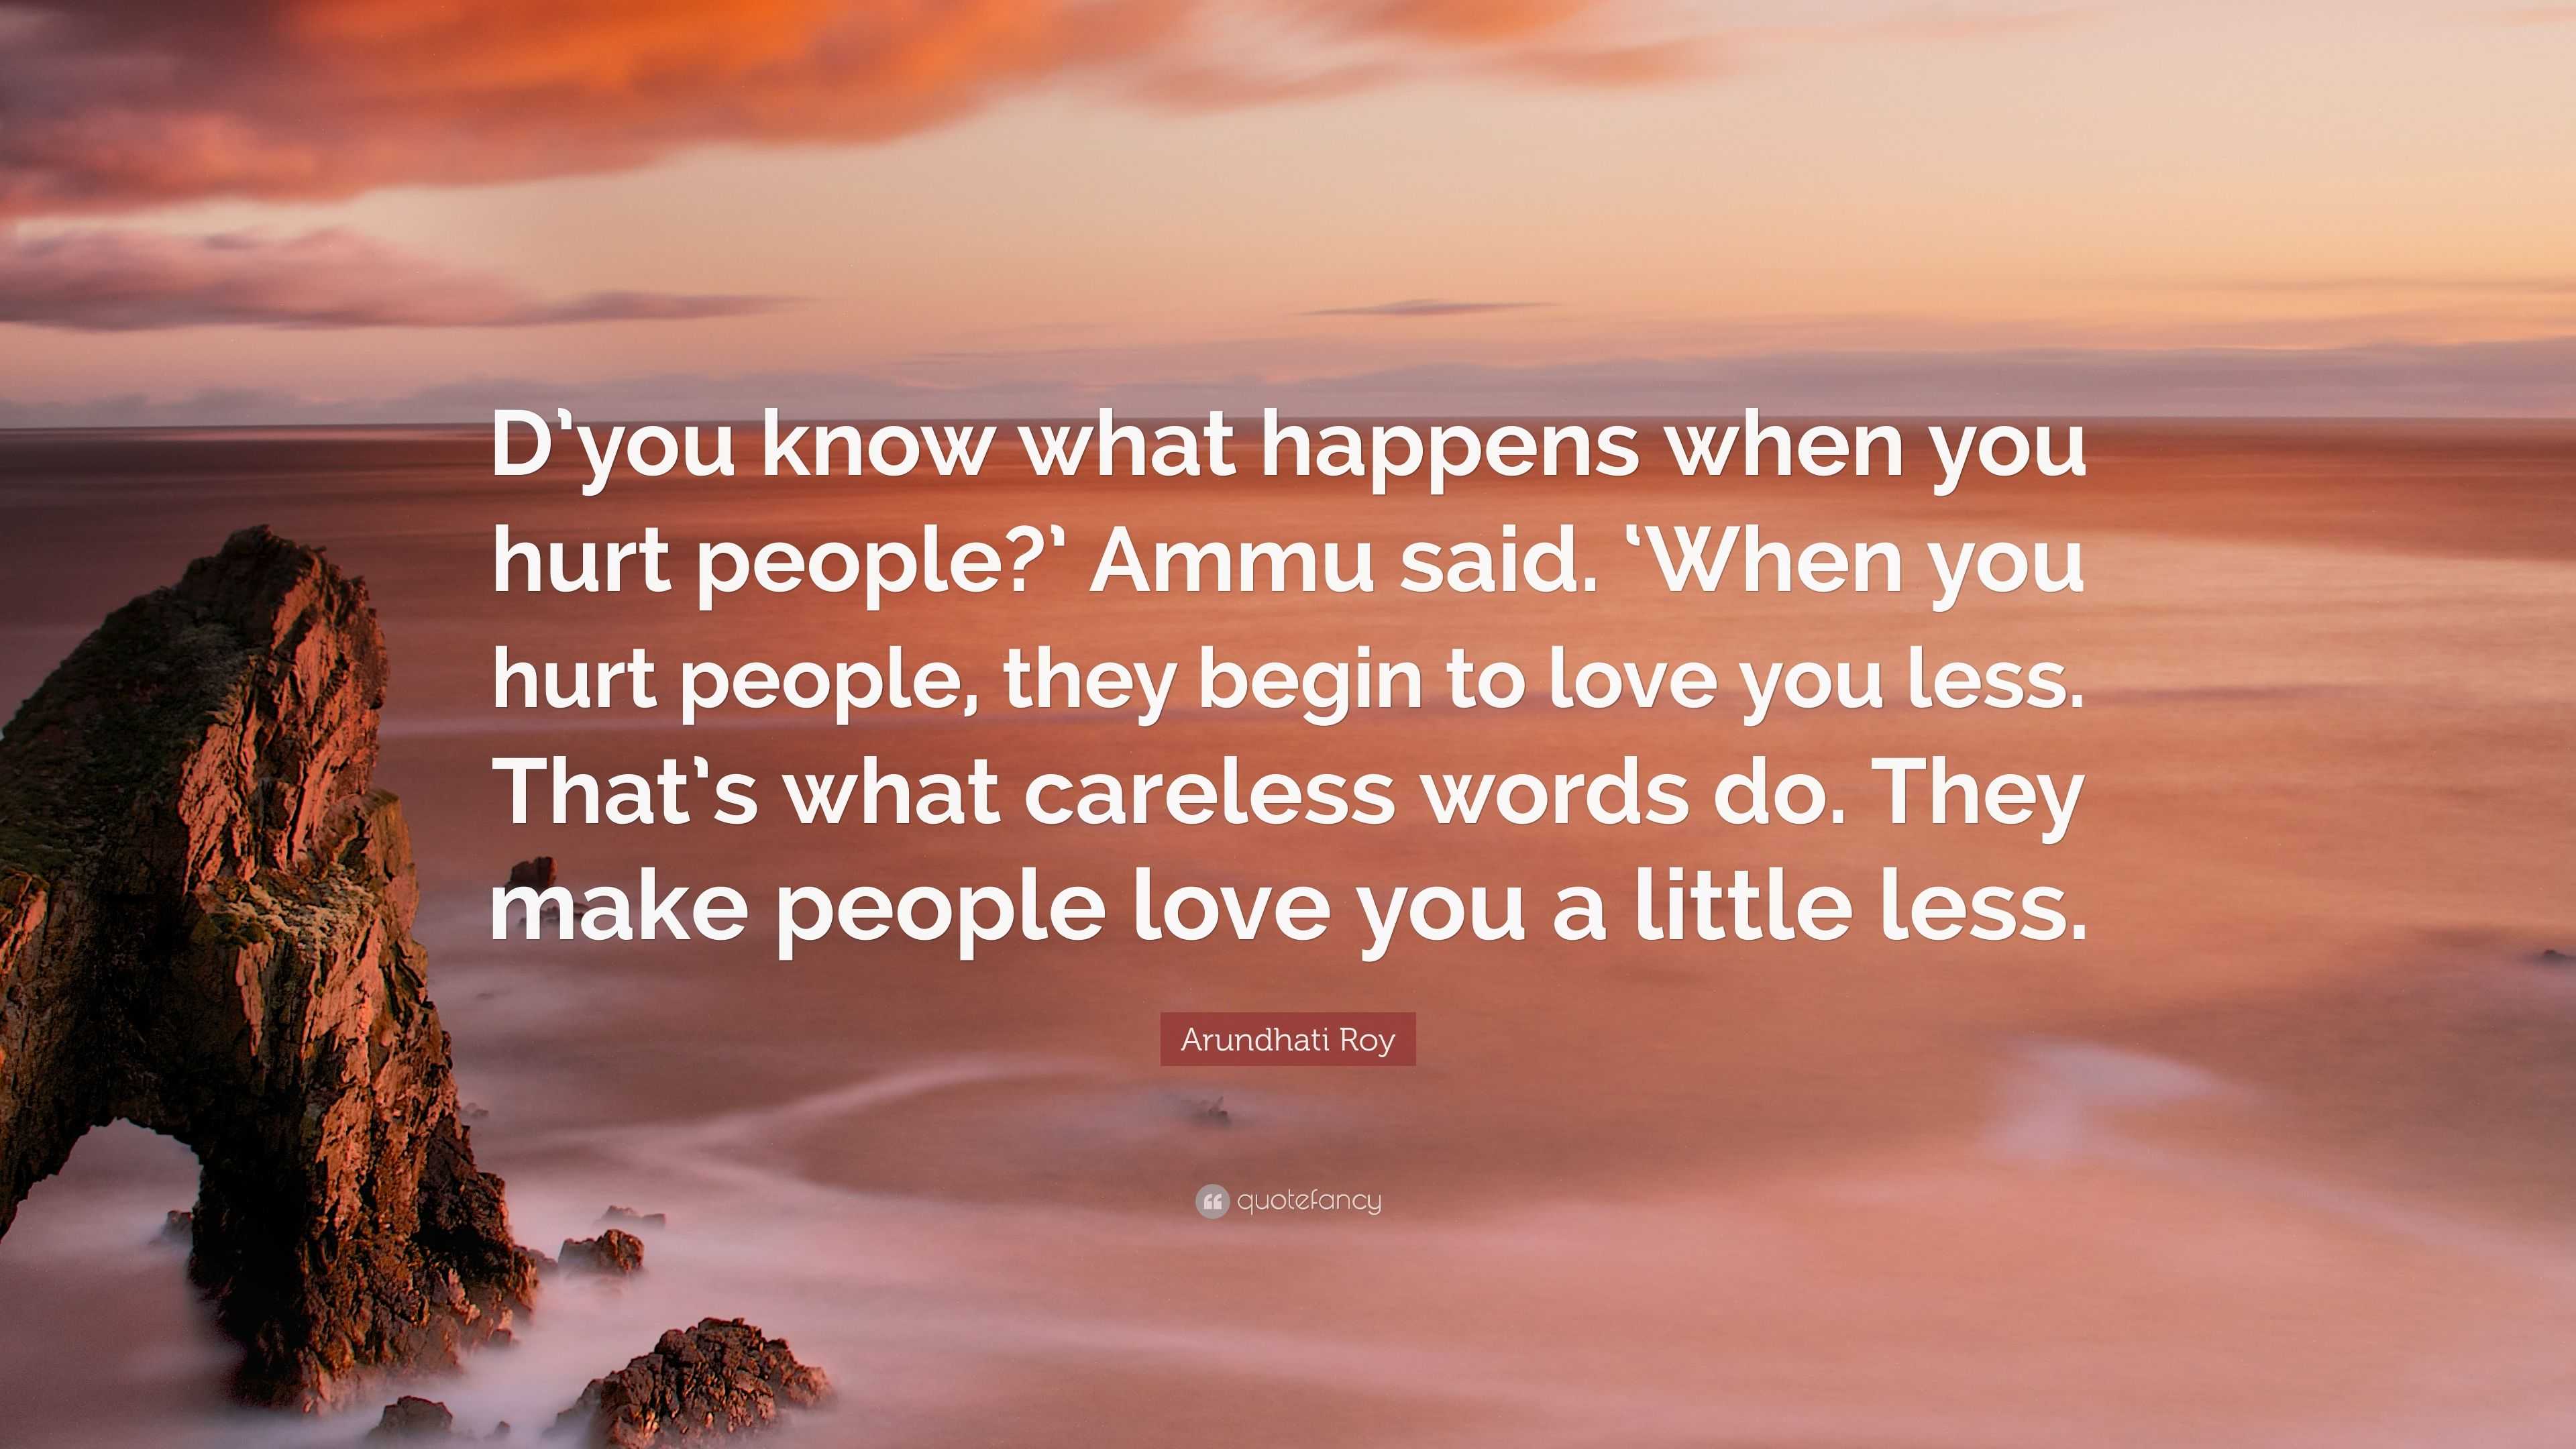 Arundhati Roy Quote “D you know what happens when you hurt people